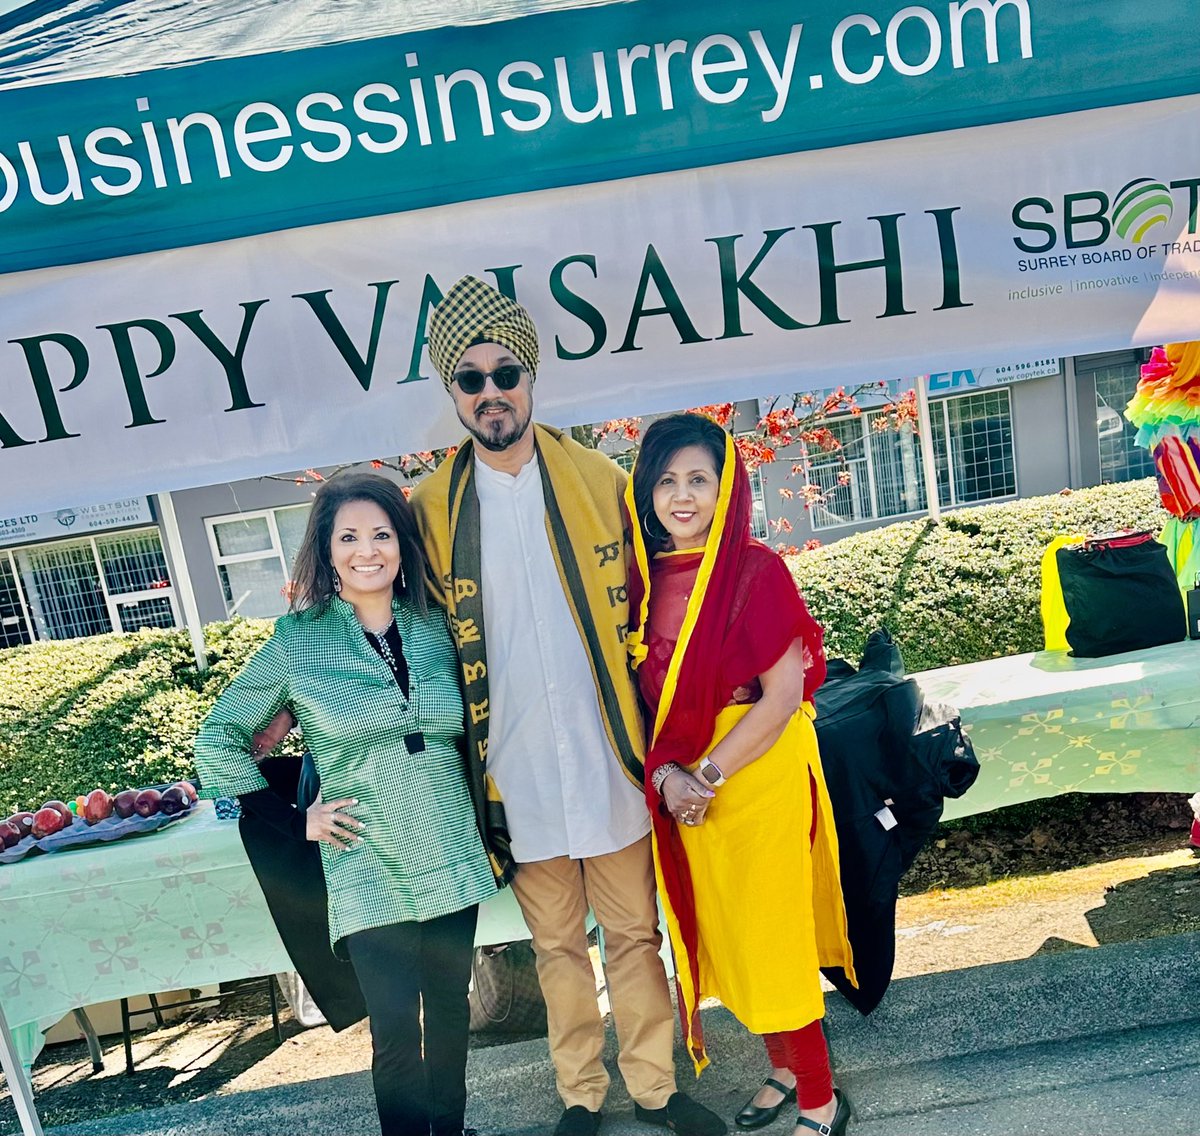 Happy Vaisakhi from the Surrey Board of Trade! Great to see community colleagues today. @SBofT